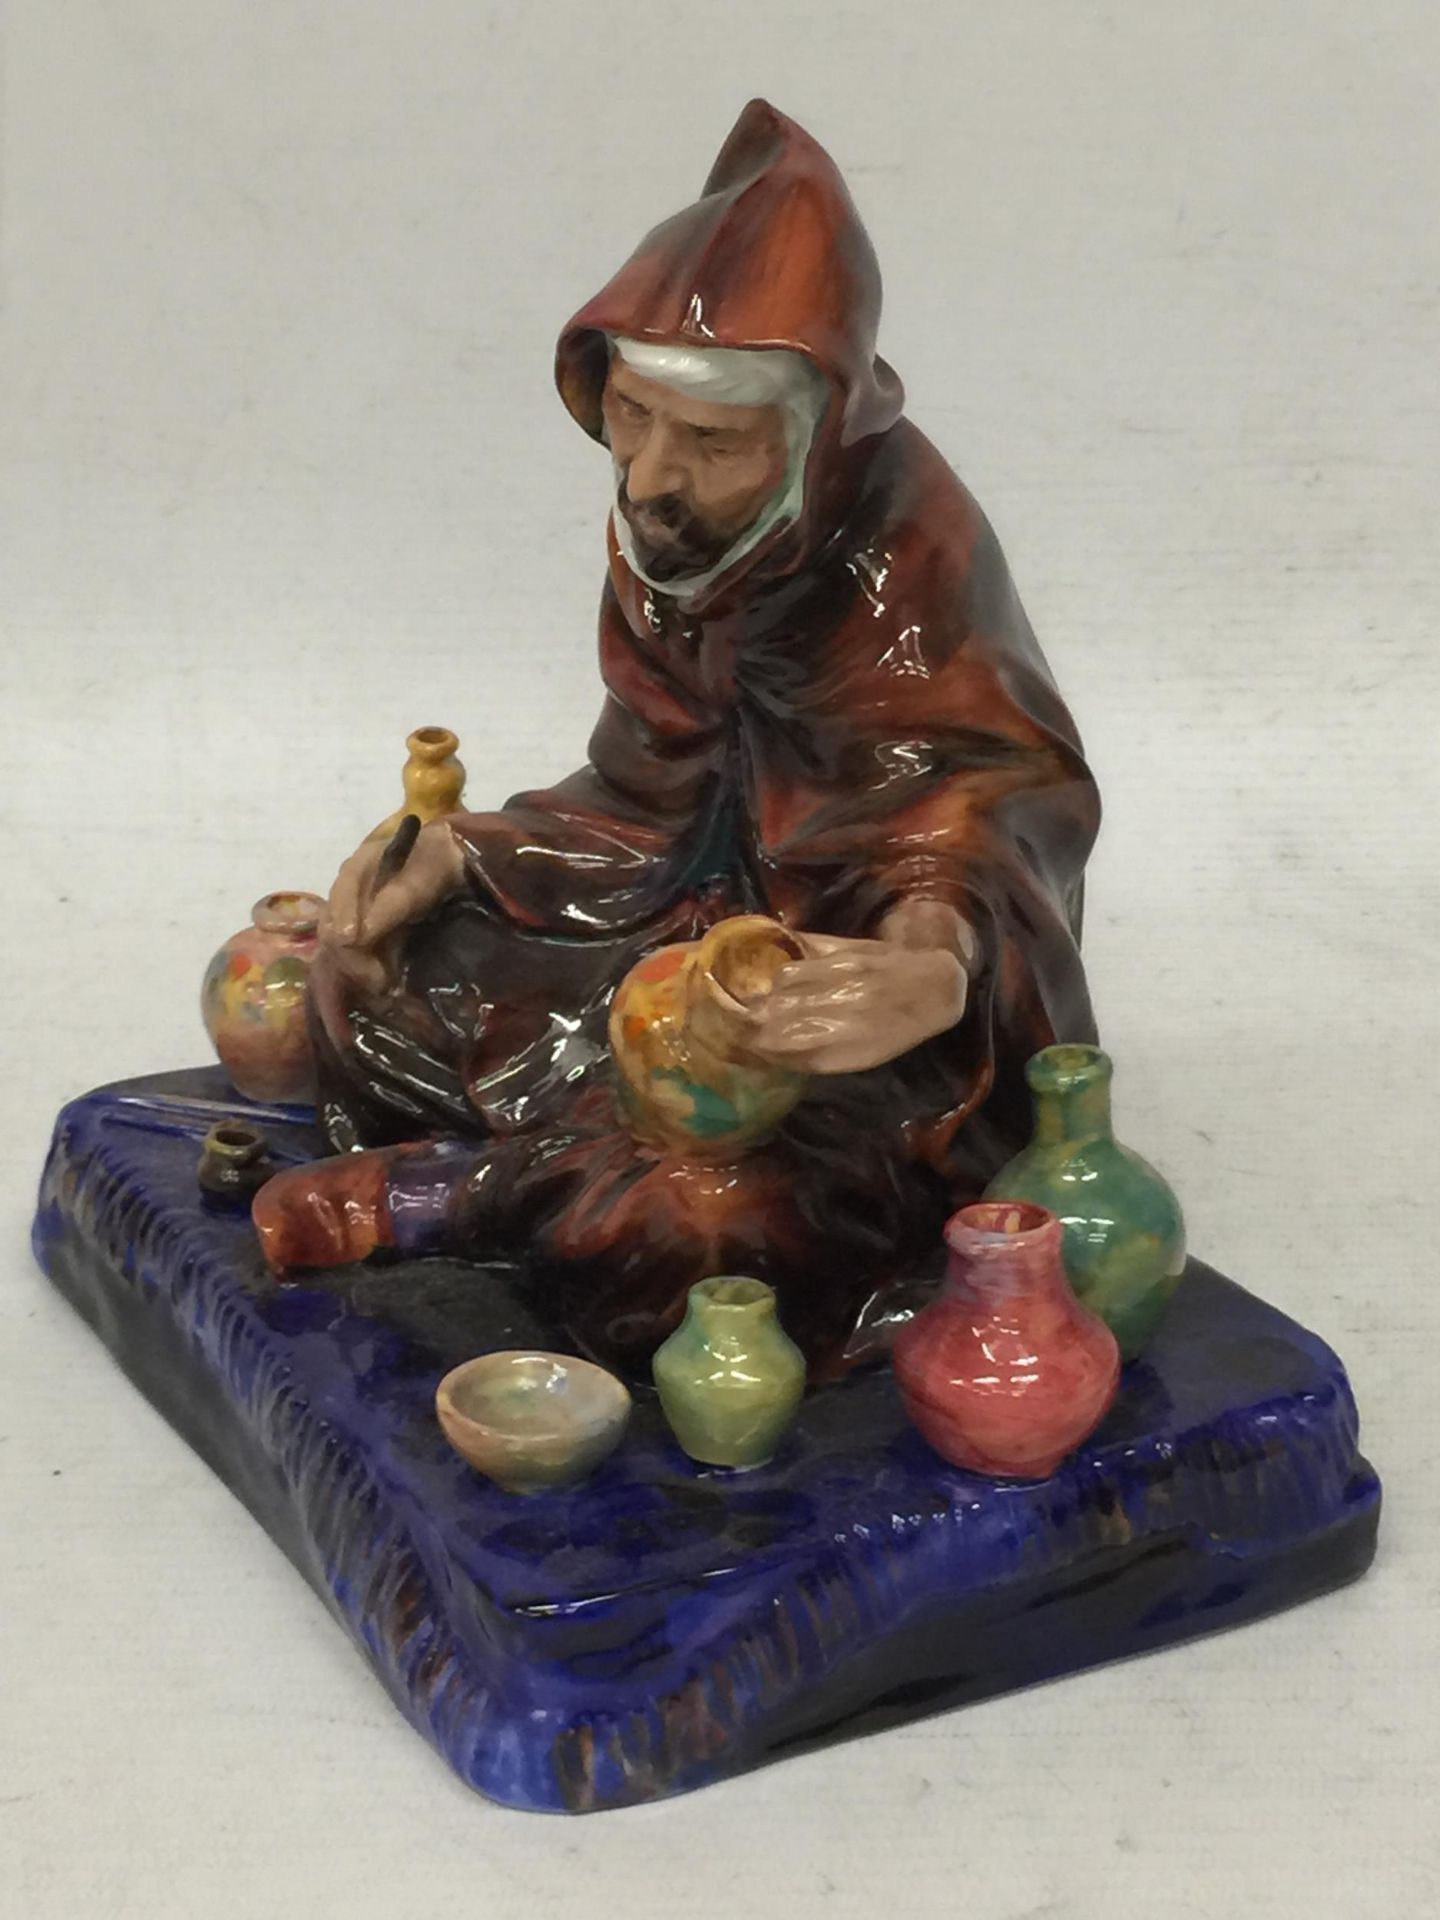 A ROYAL DOULTON 'THE POTTER' HN1493 FIGURE - Image 2 of 4